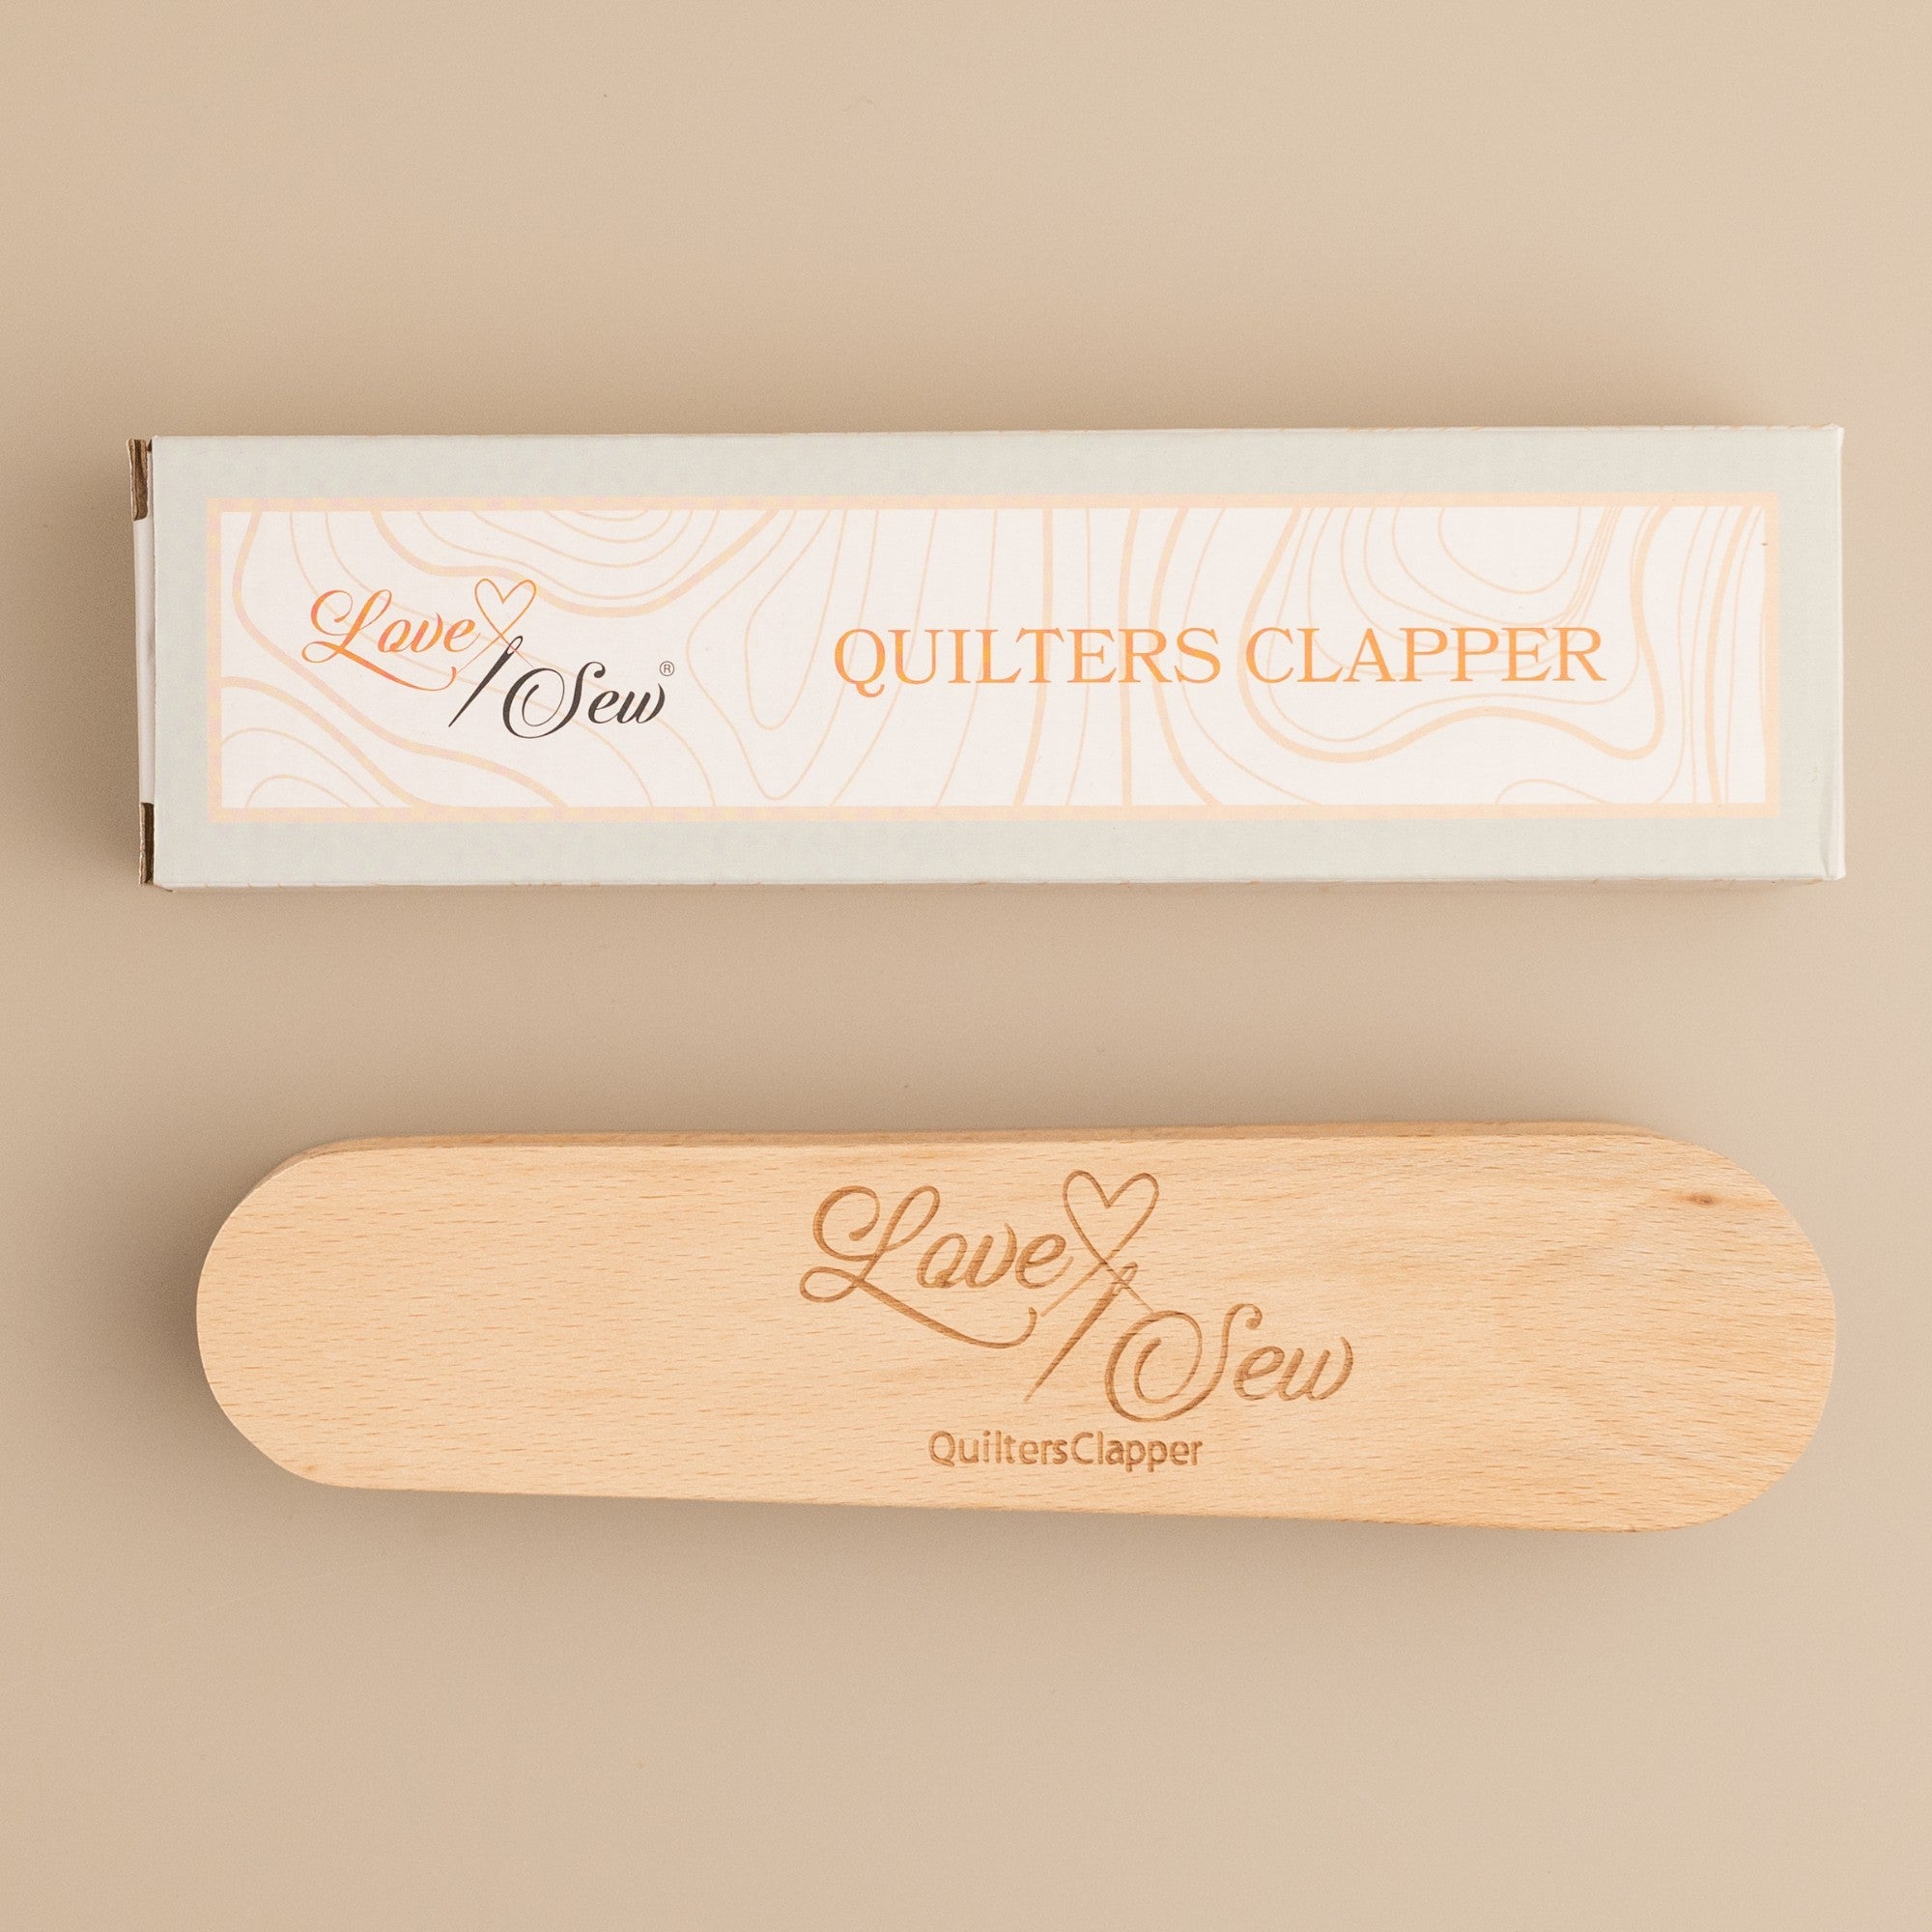 Quilter's Clapper